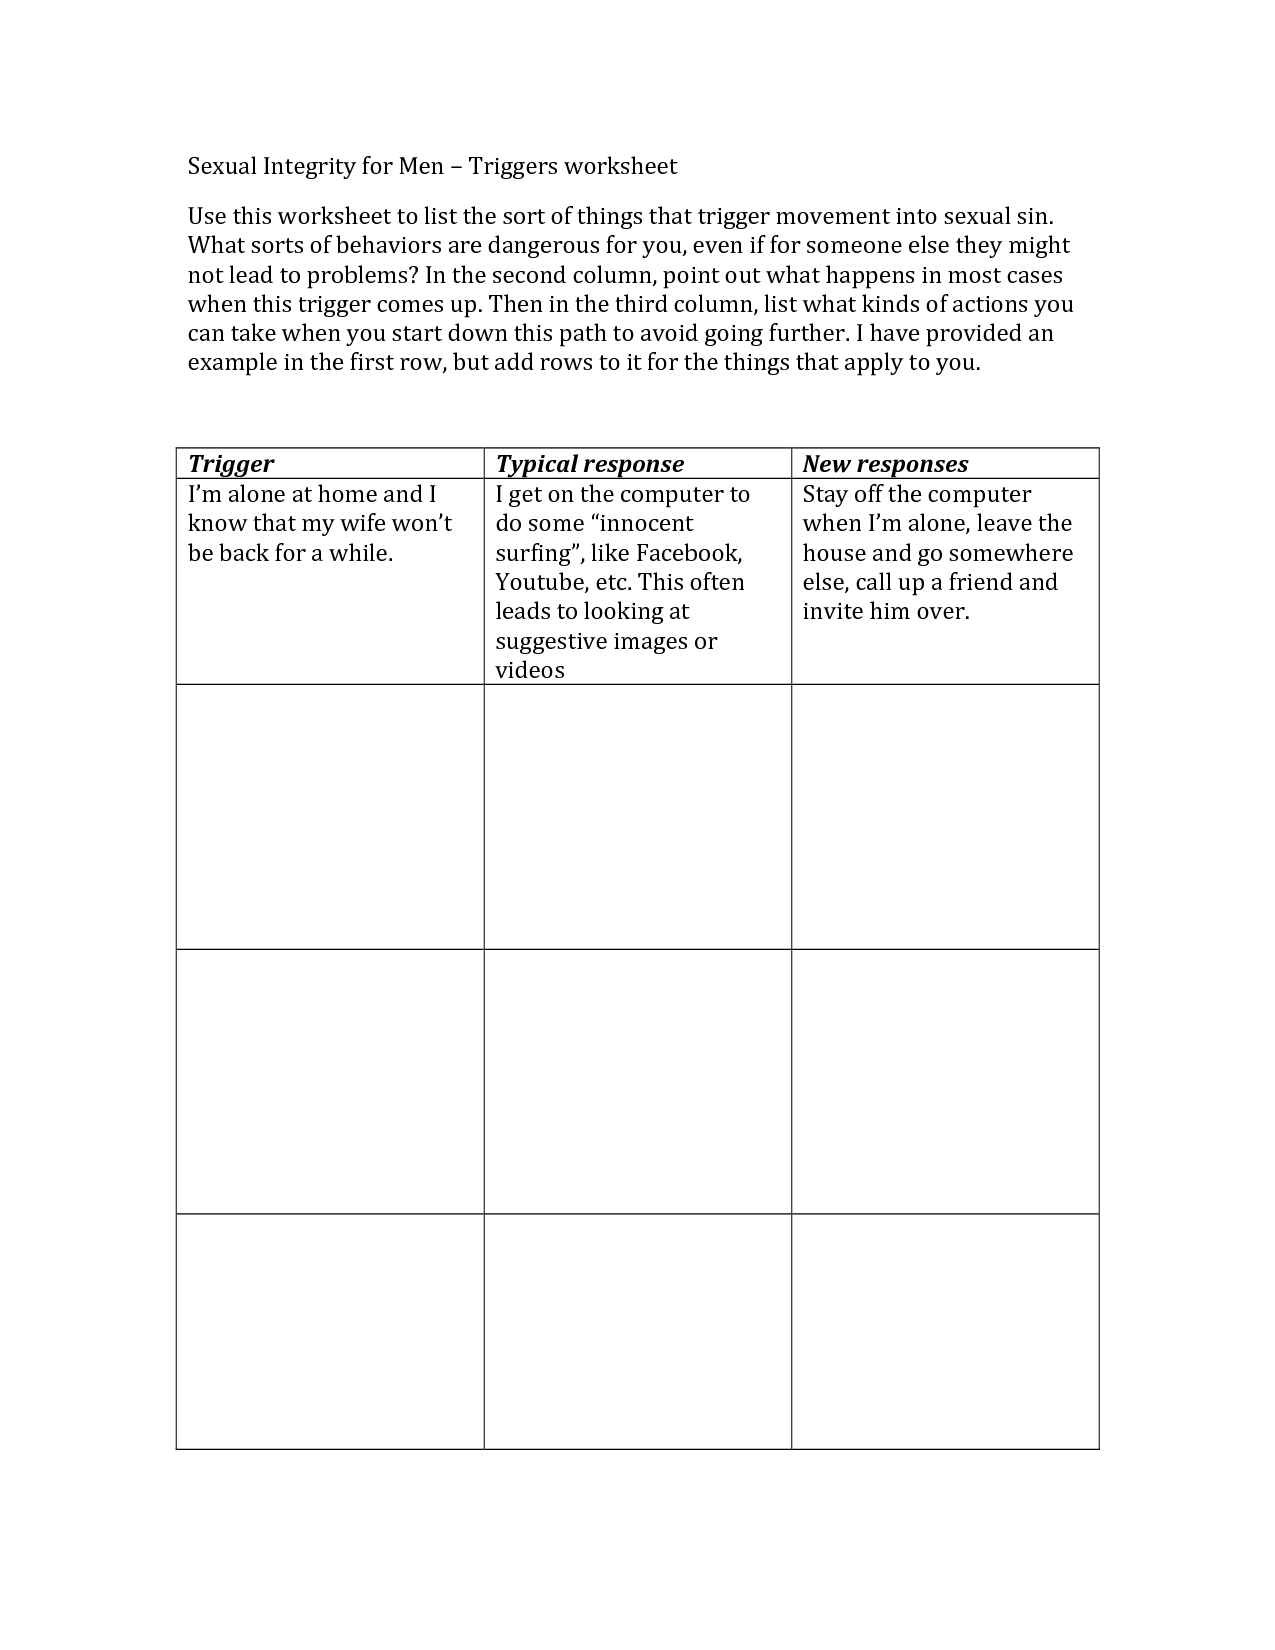 17-best-images-of-addiction-recovery-worksheets-printable-addiction